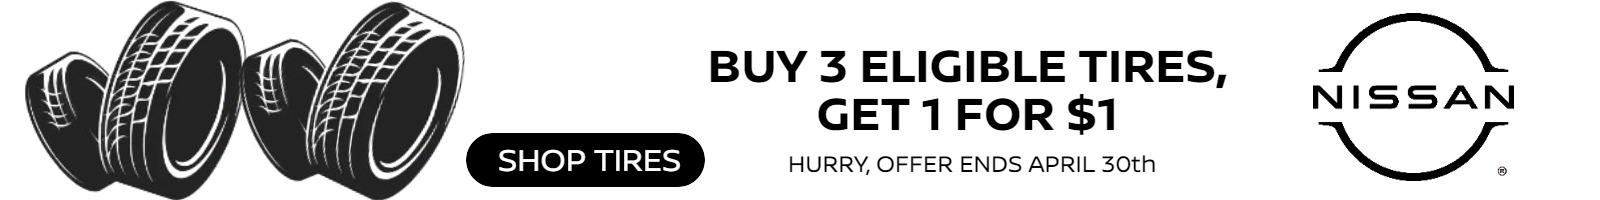 BUY 3 ELIGIBLE TIRES, GET 1 FOR $1